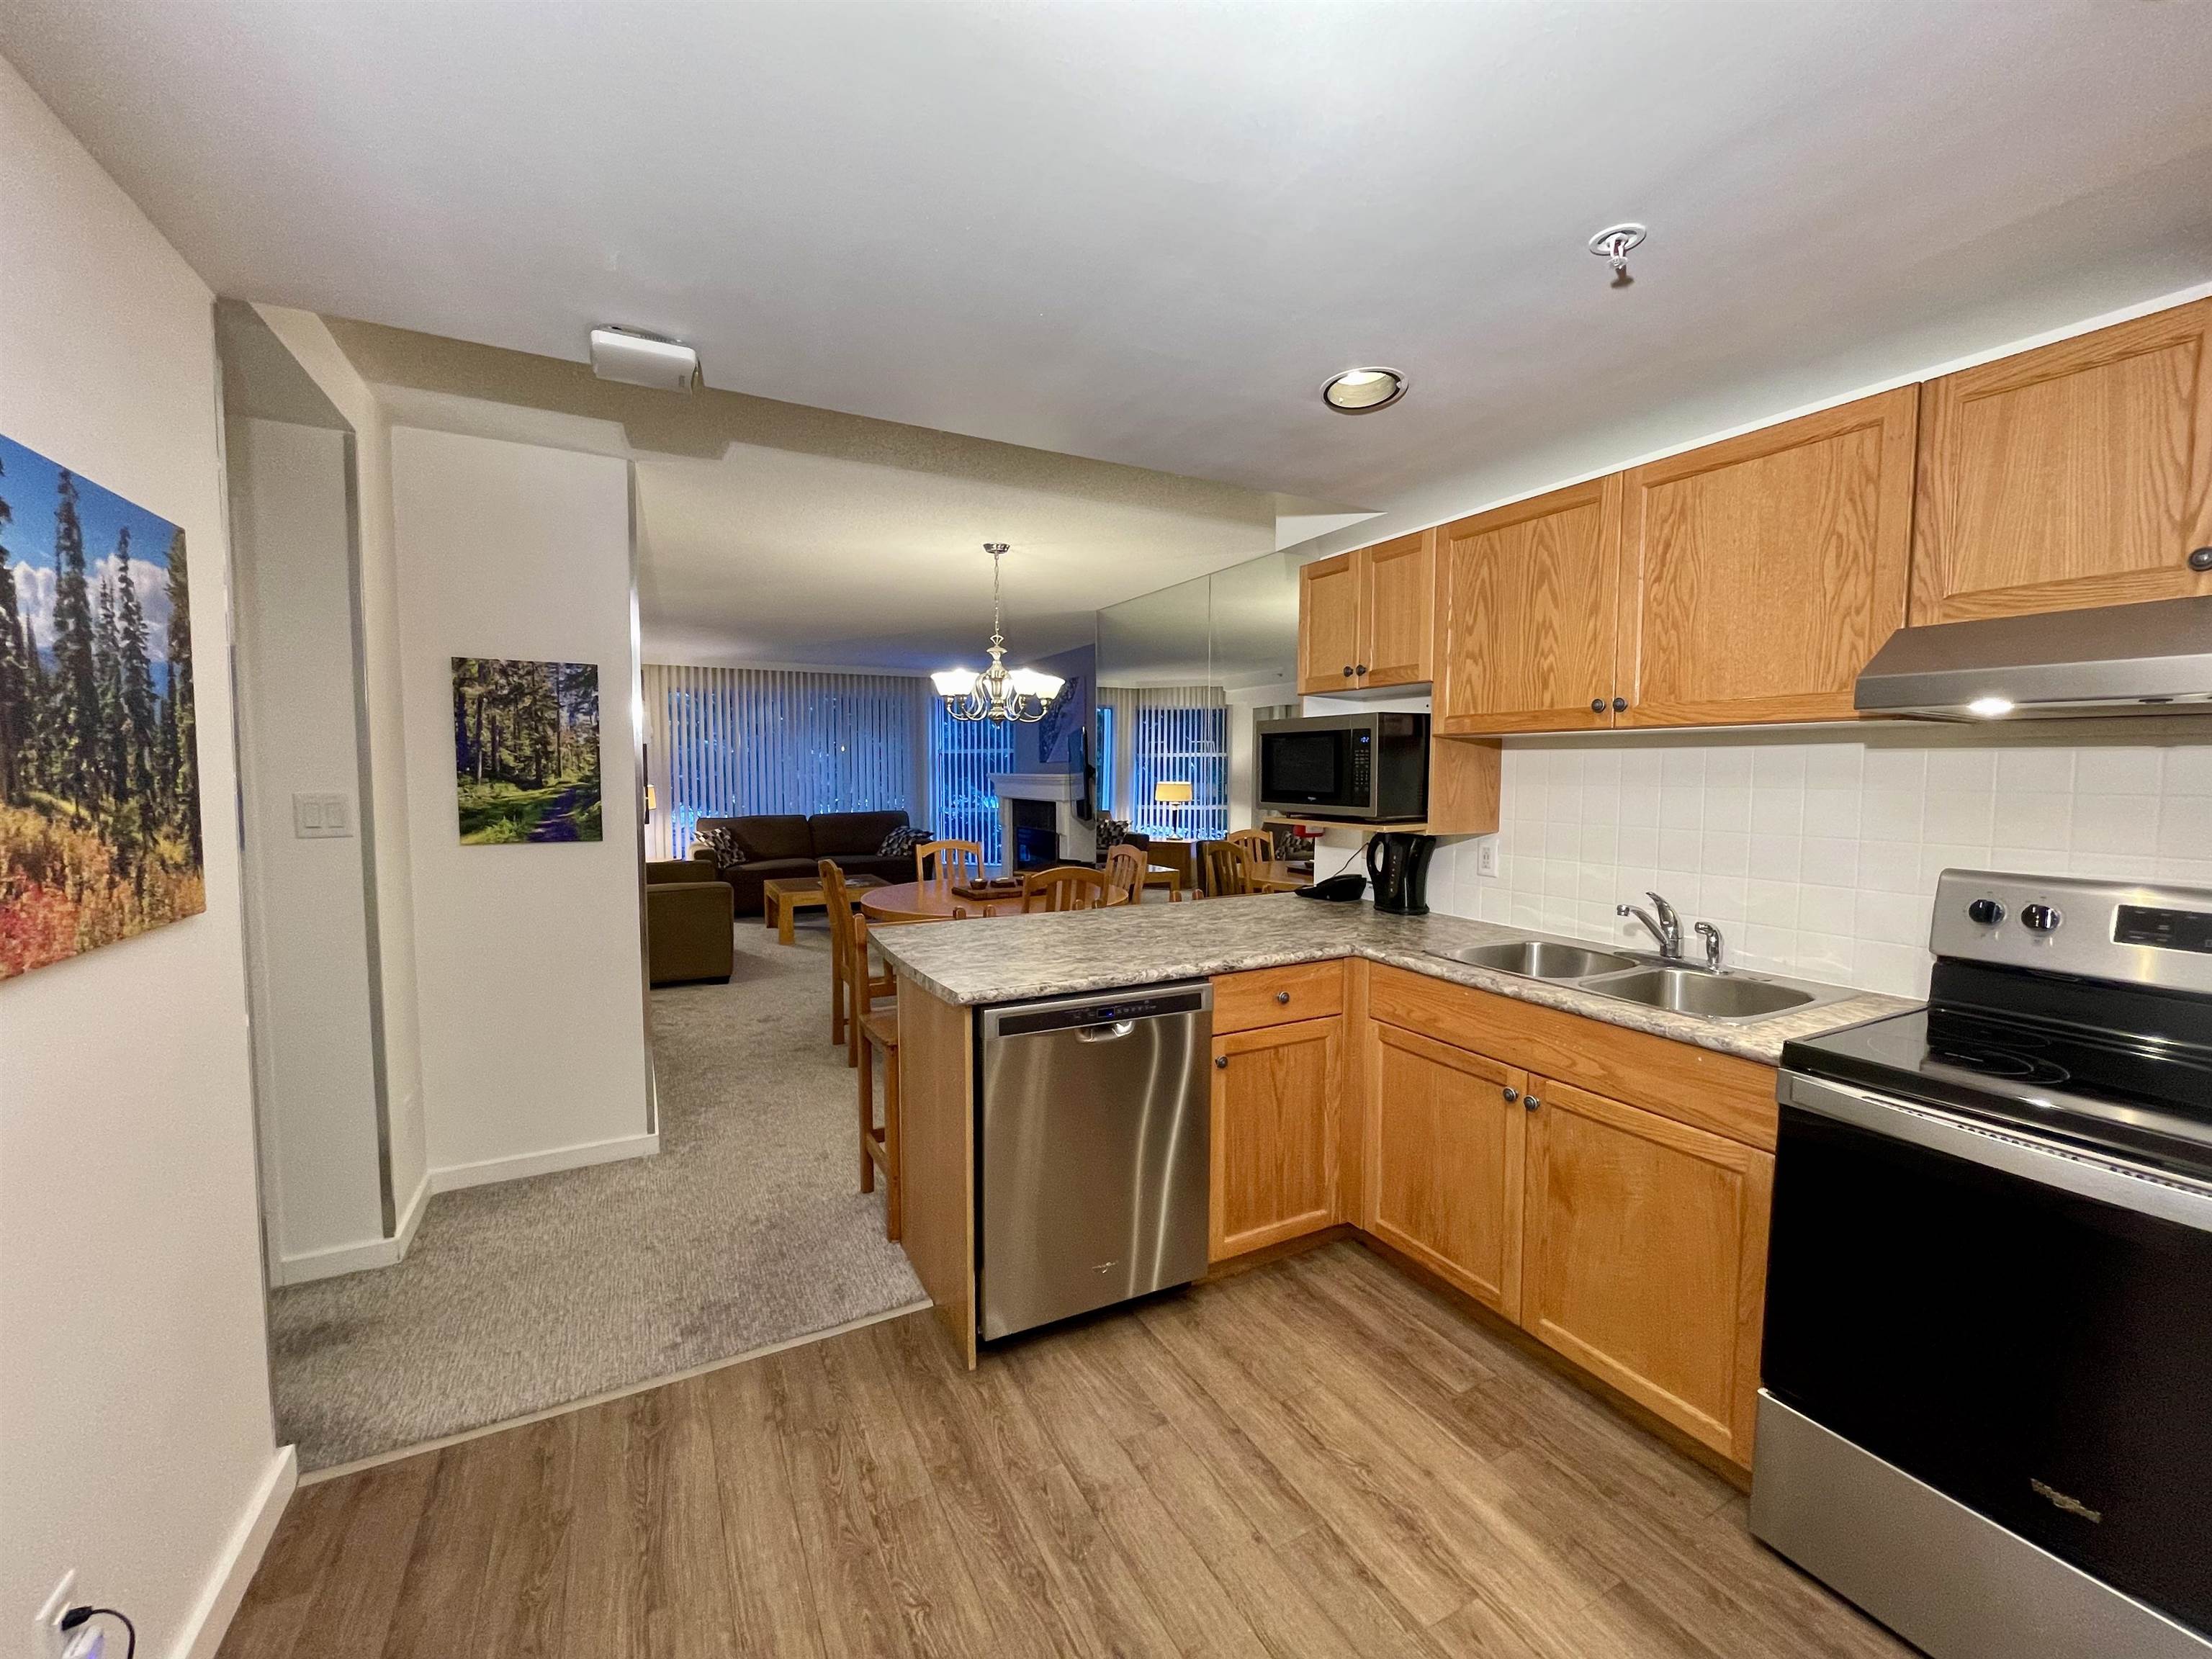 Listing image of 420 Wk13-4910 SPEARHEAD PLACE